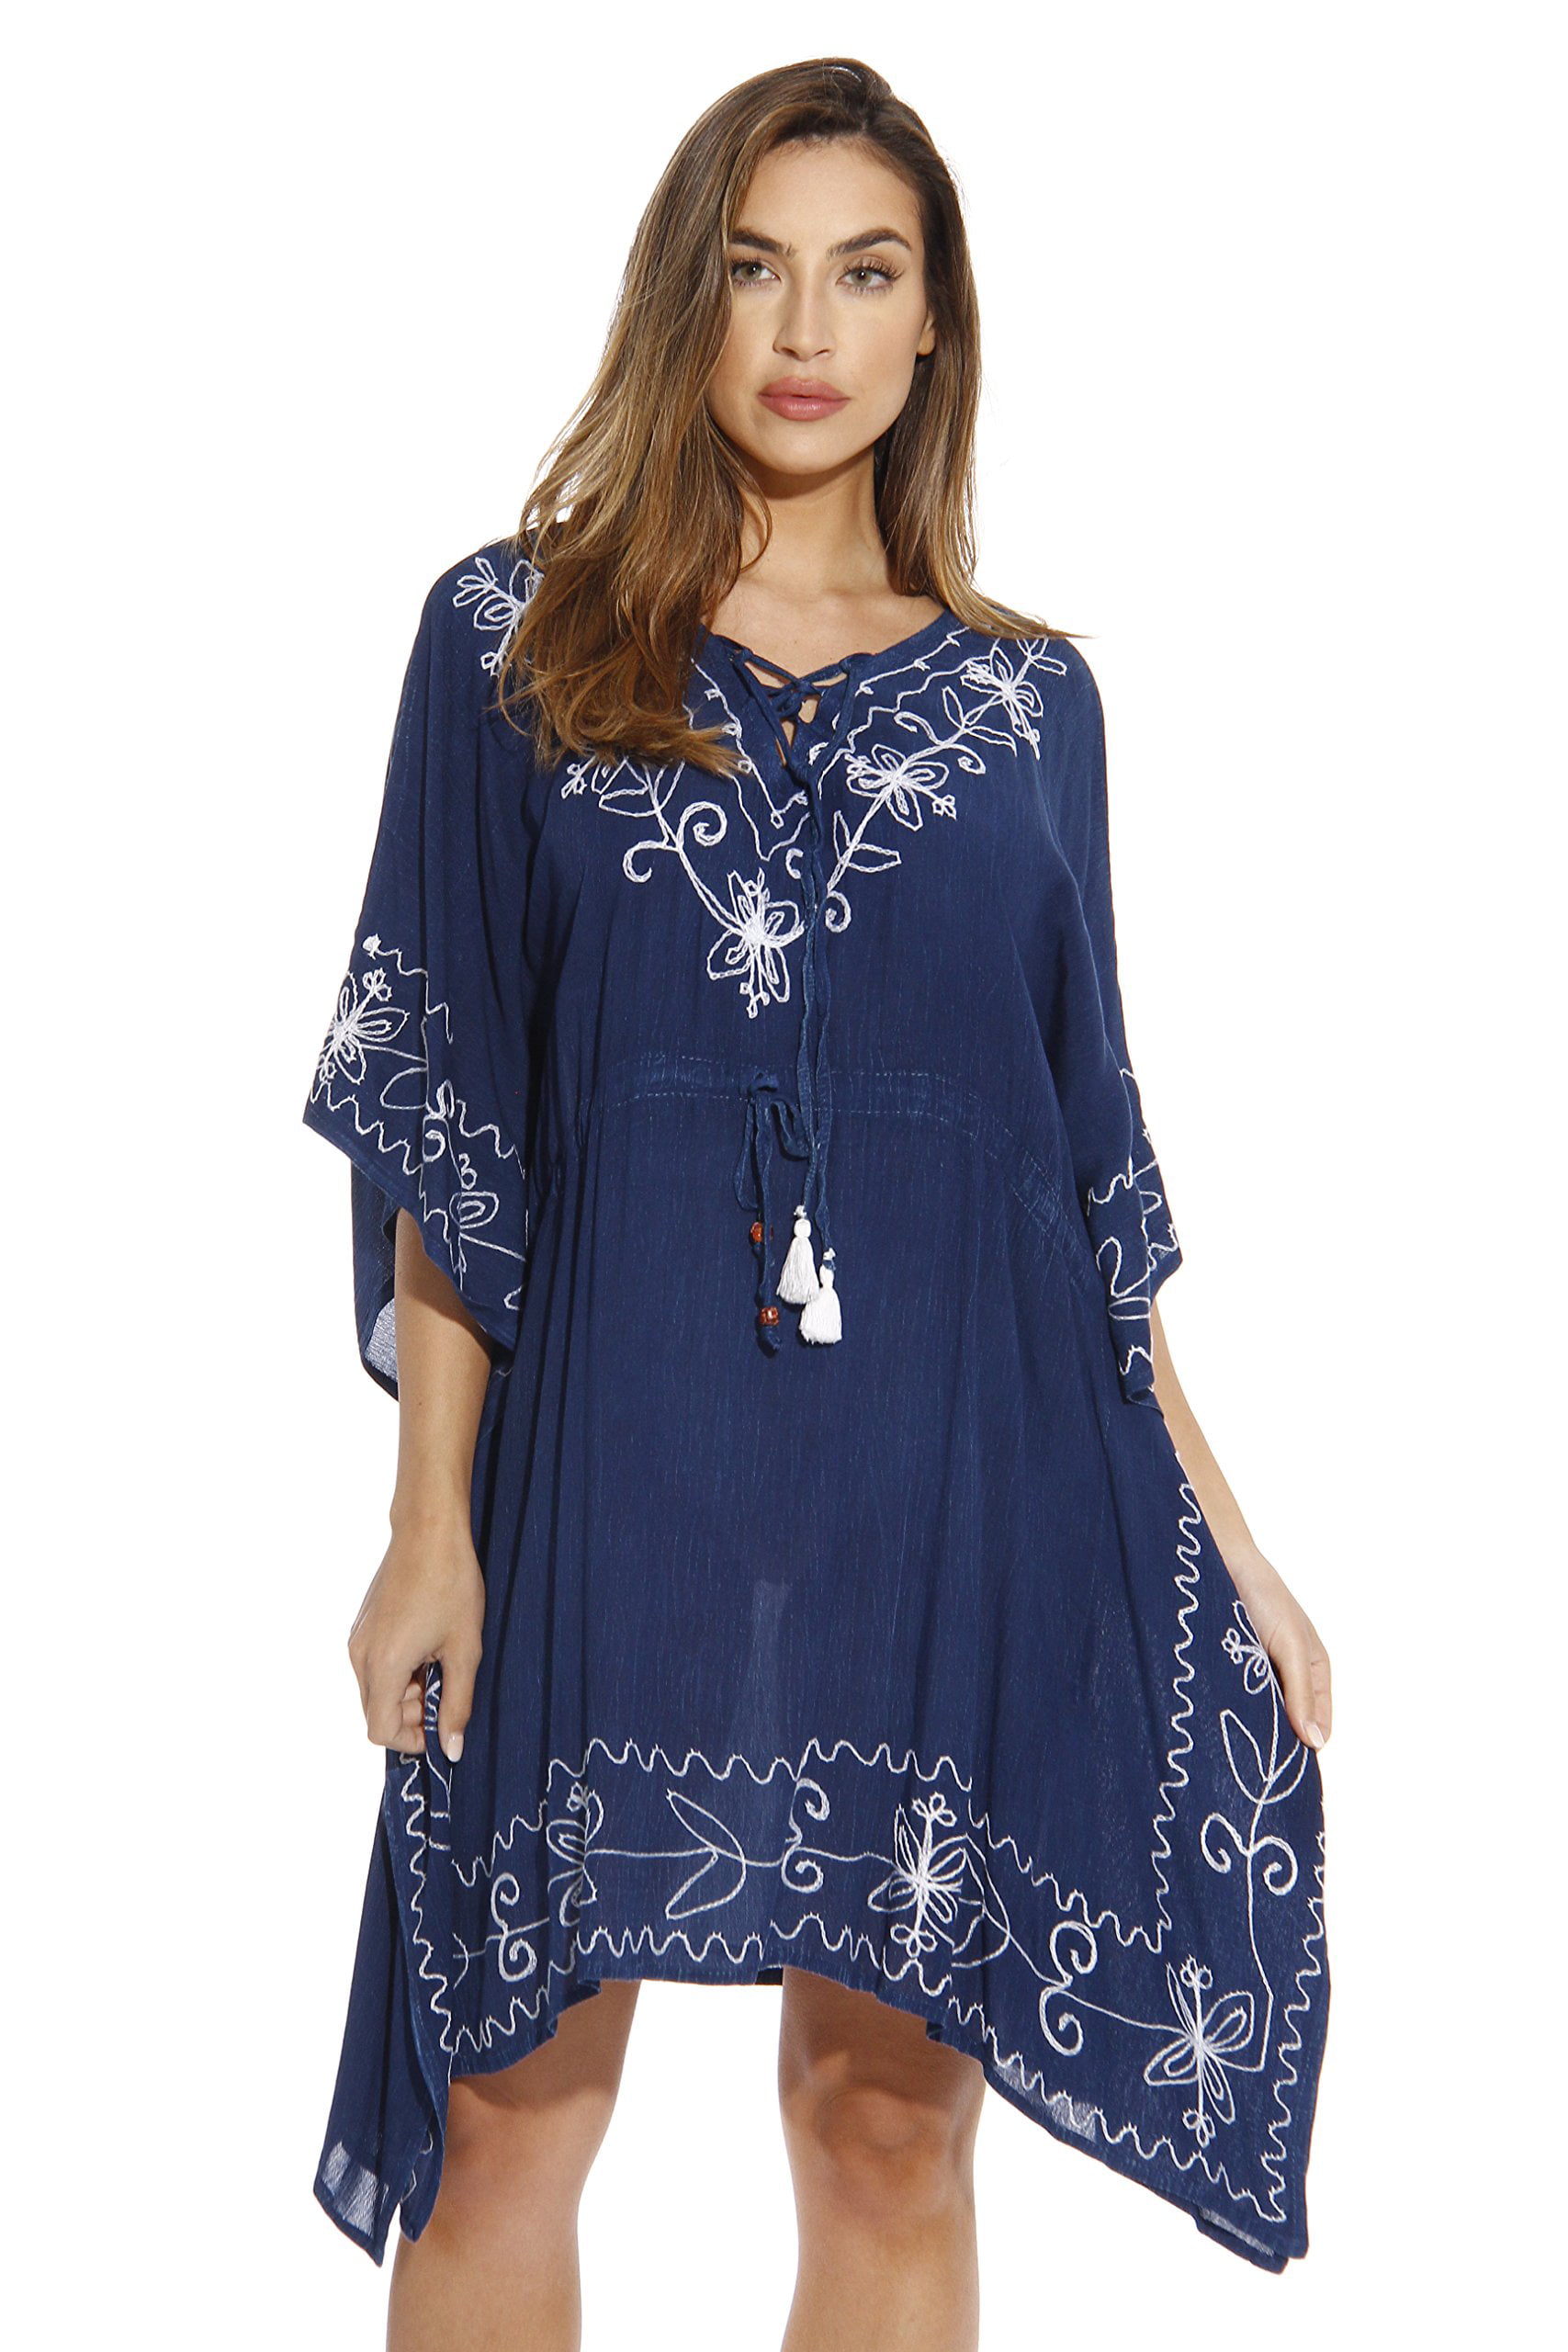 Riviera Sun Lace Up Caftan / Caftans for Women (Dark Denim with White ...